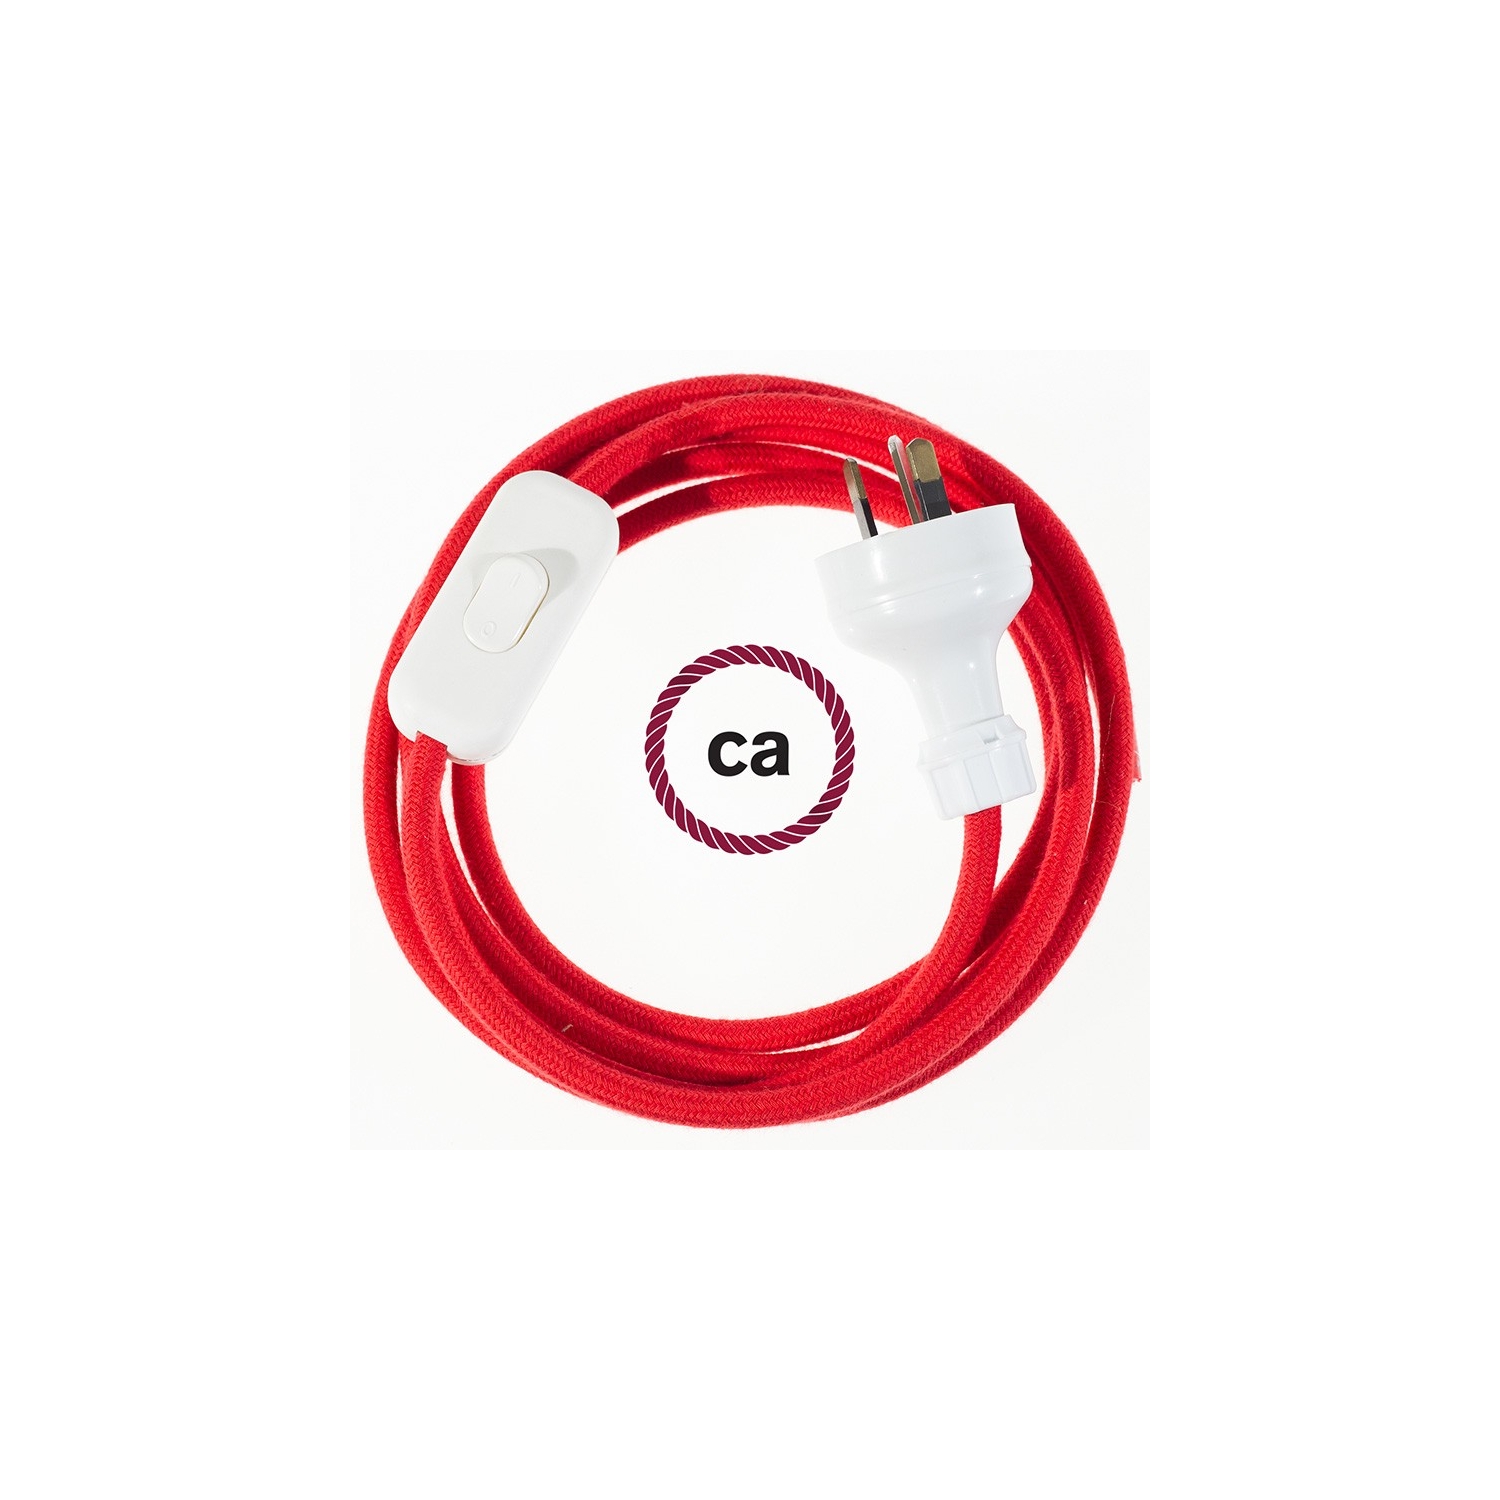 Wiring Fire Red Cotton textile cable RC35 - 1.80 mt